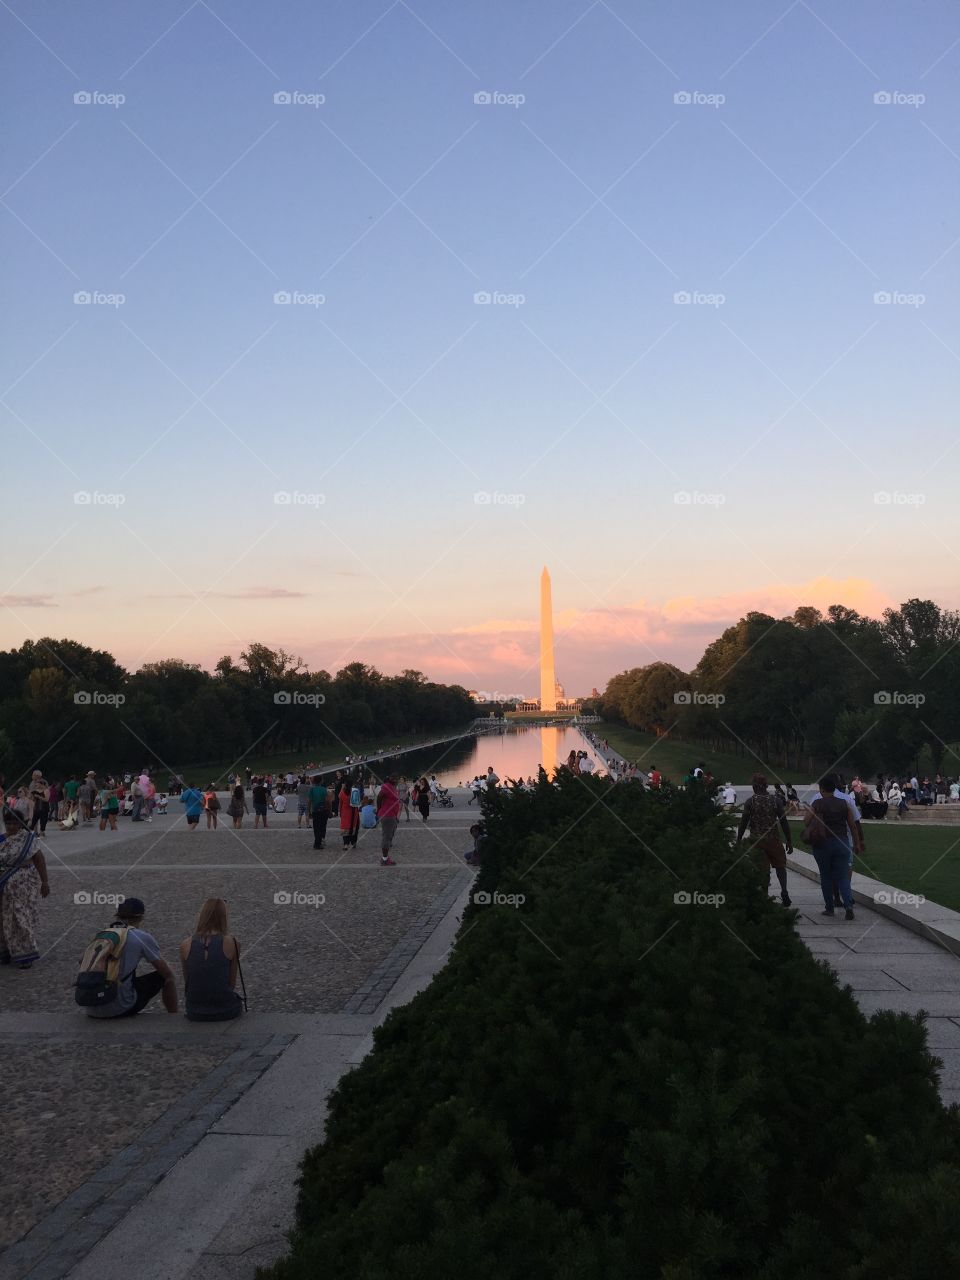 Night sunset by the monument 